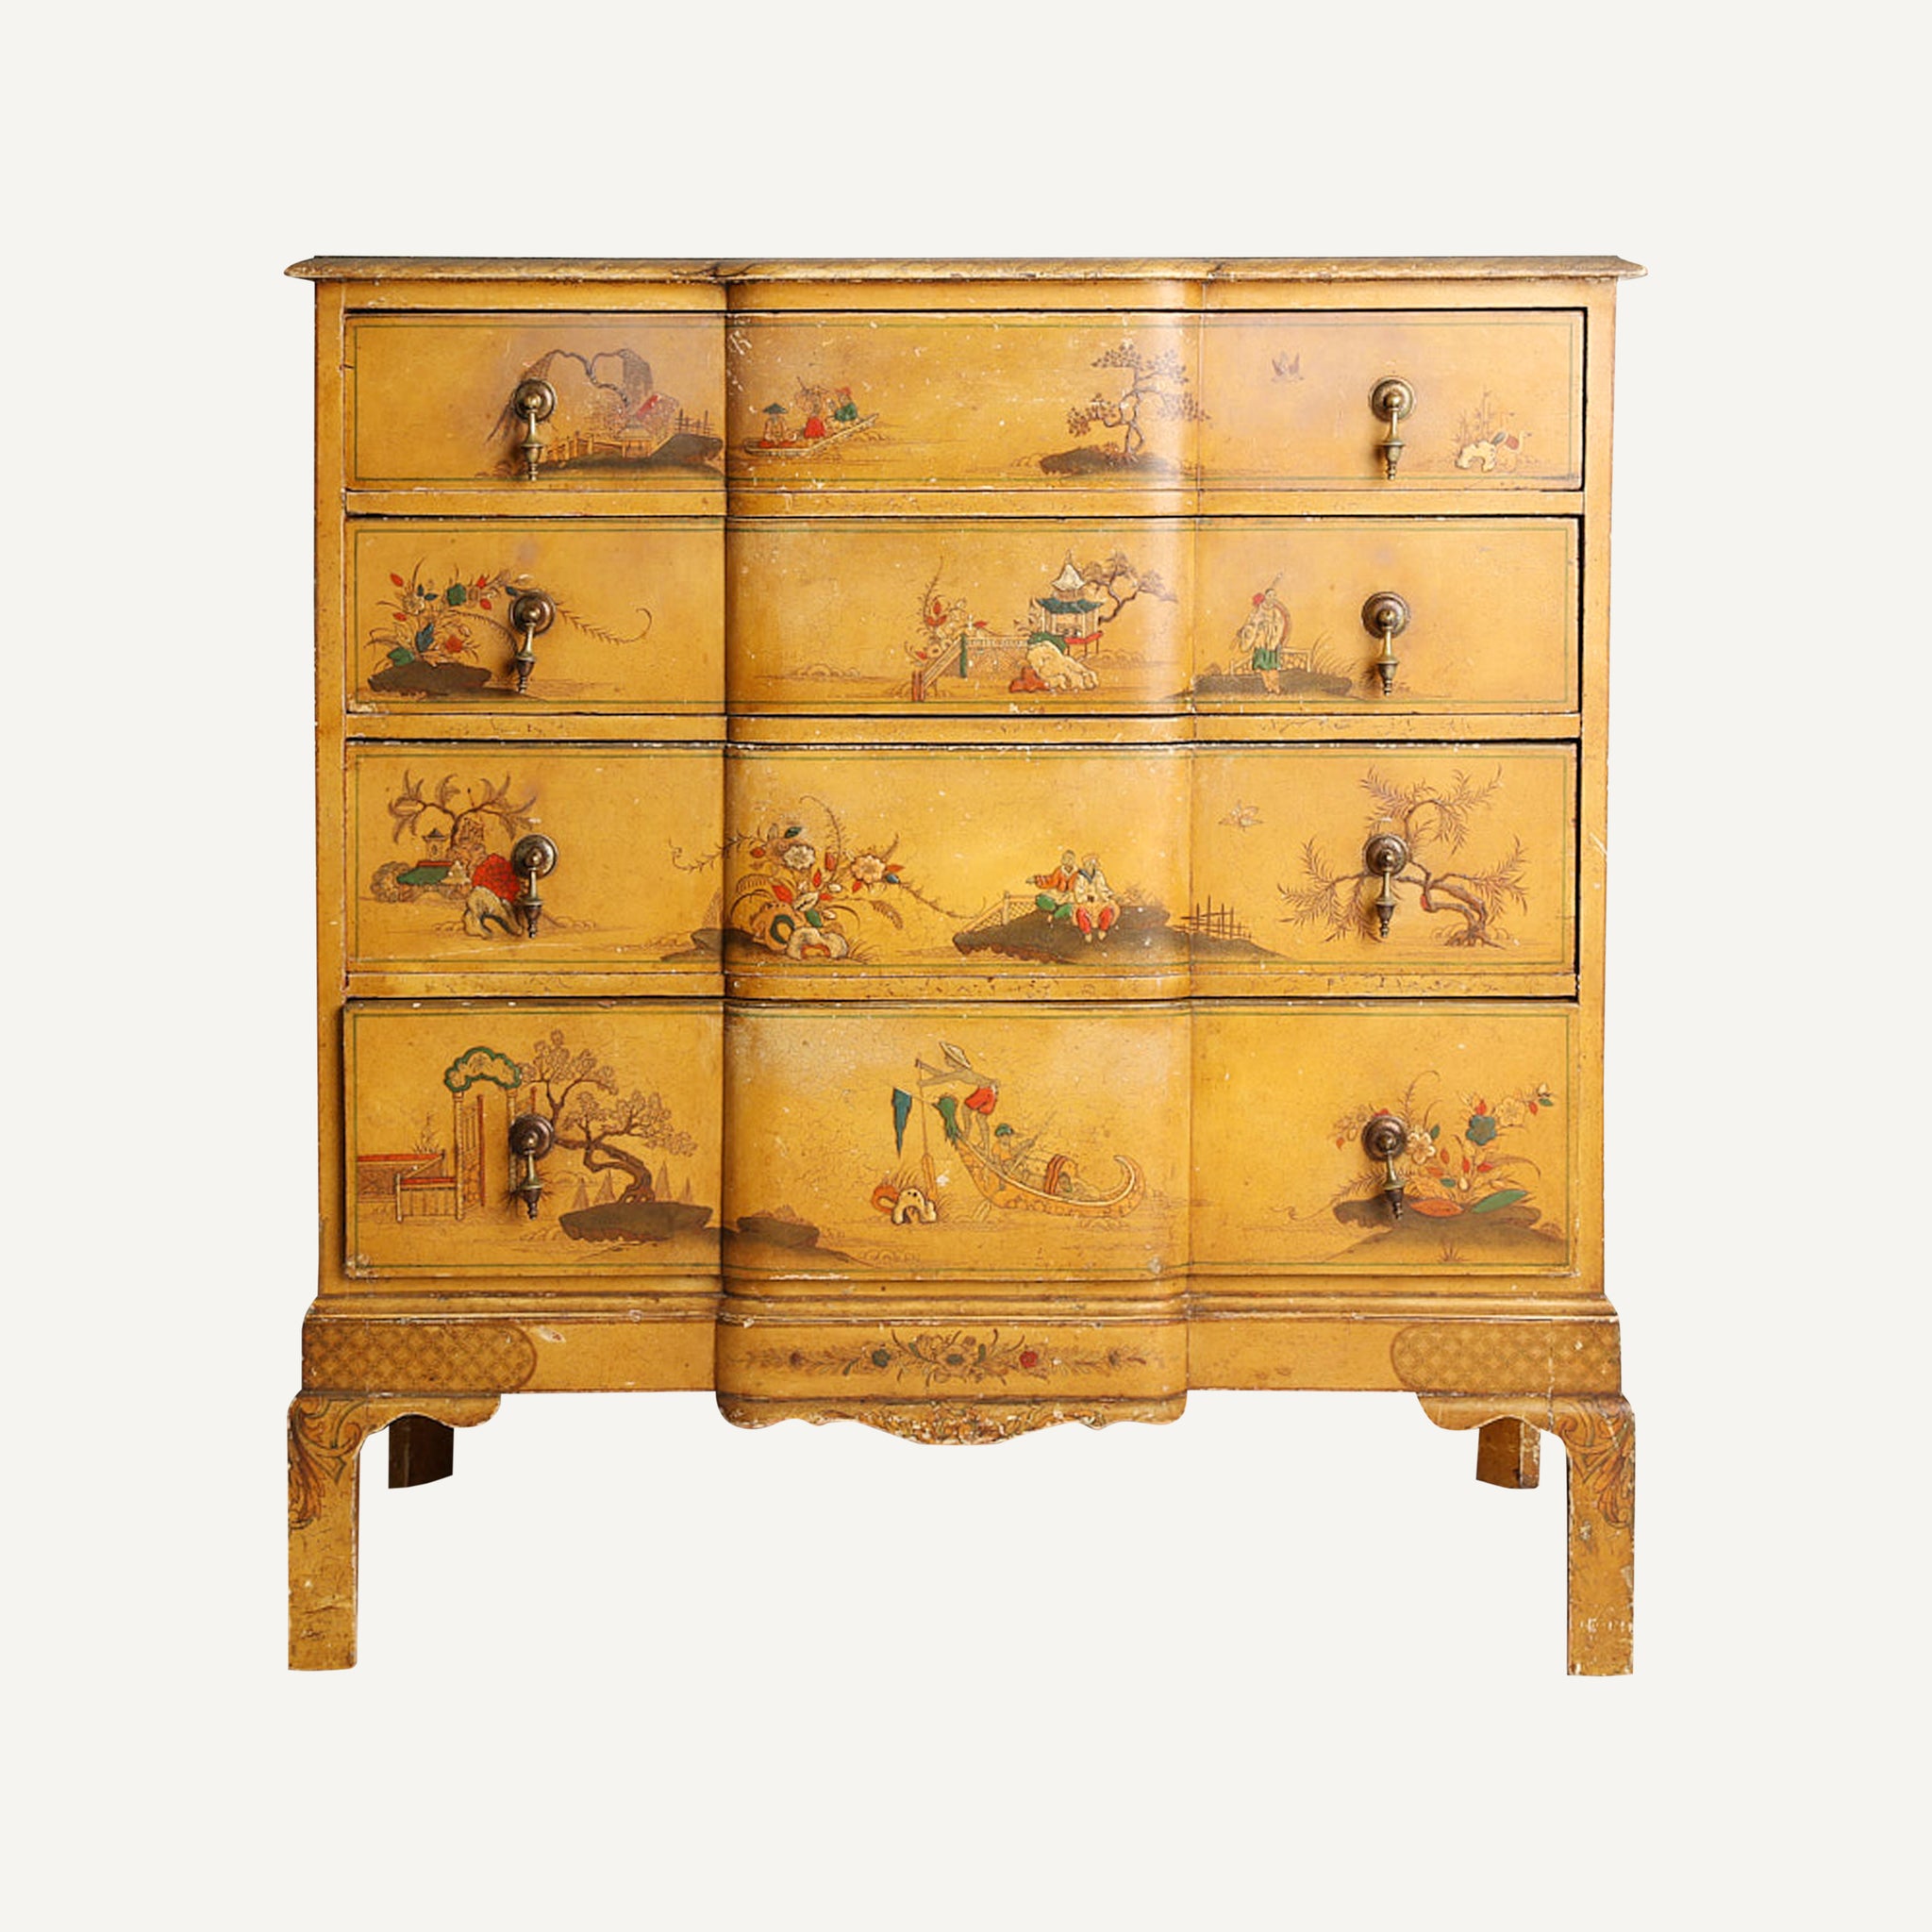 VINTAGE LACQUERED CHINOISERIE CHEST OF DRAWERS